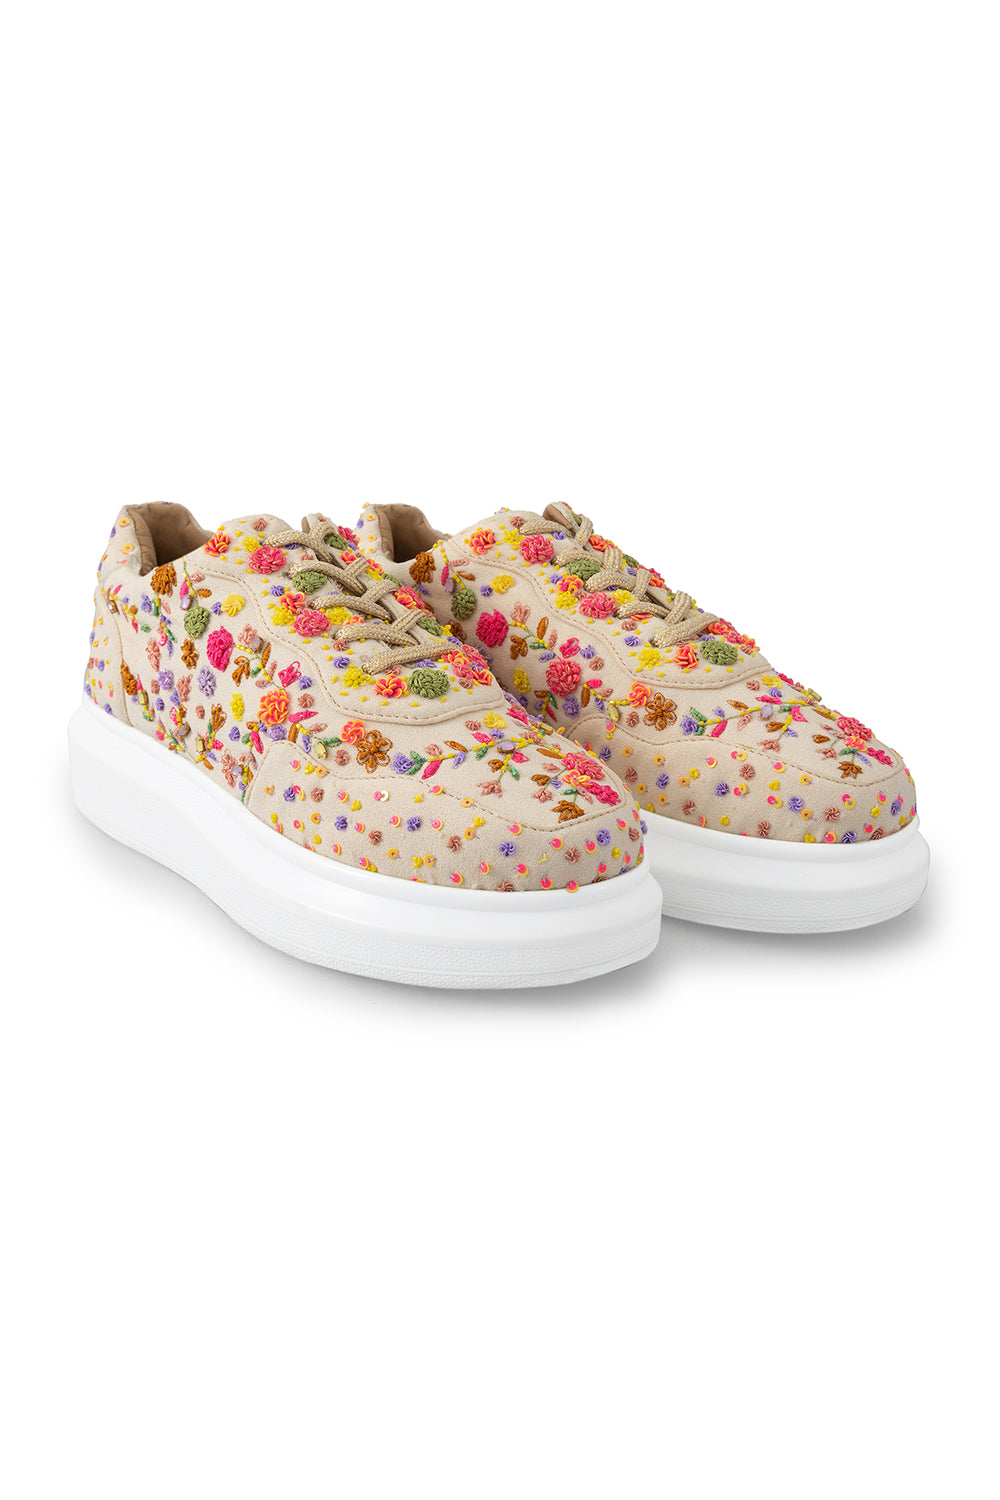 Multi Floral Corsage Classic Wedge Sneakers